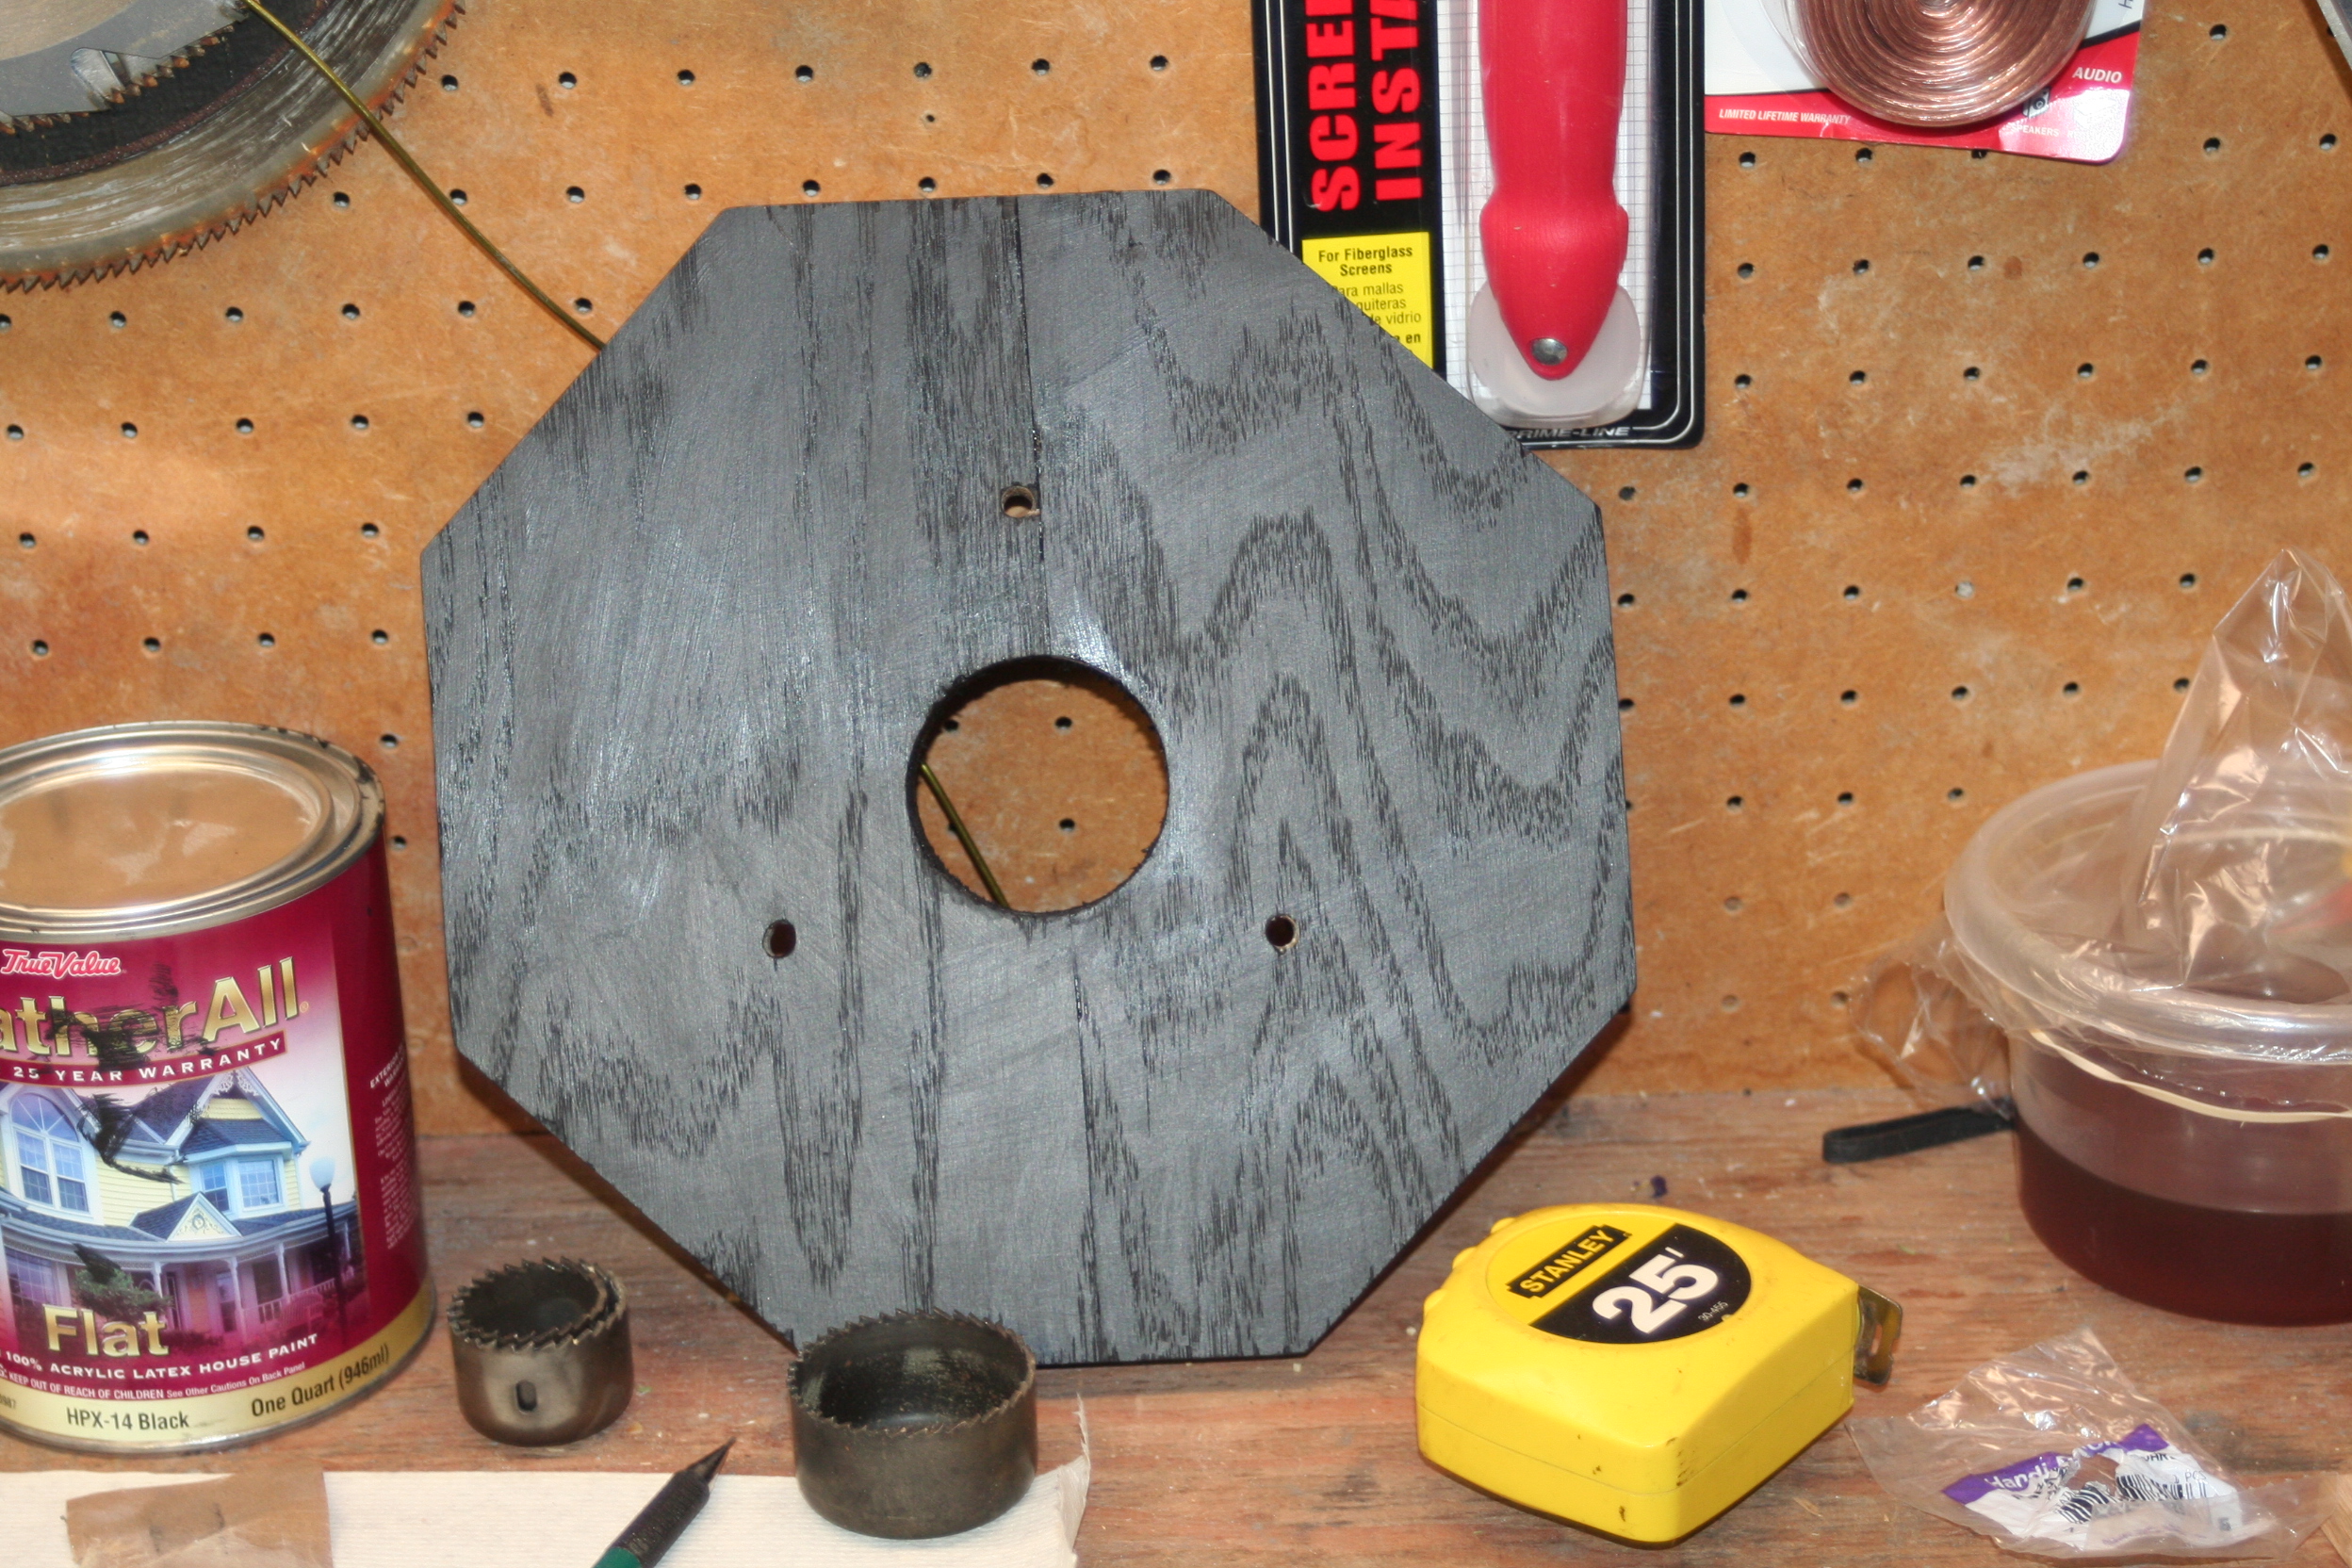 Making the hole bigger on the mirror base